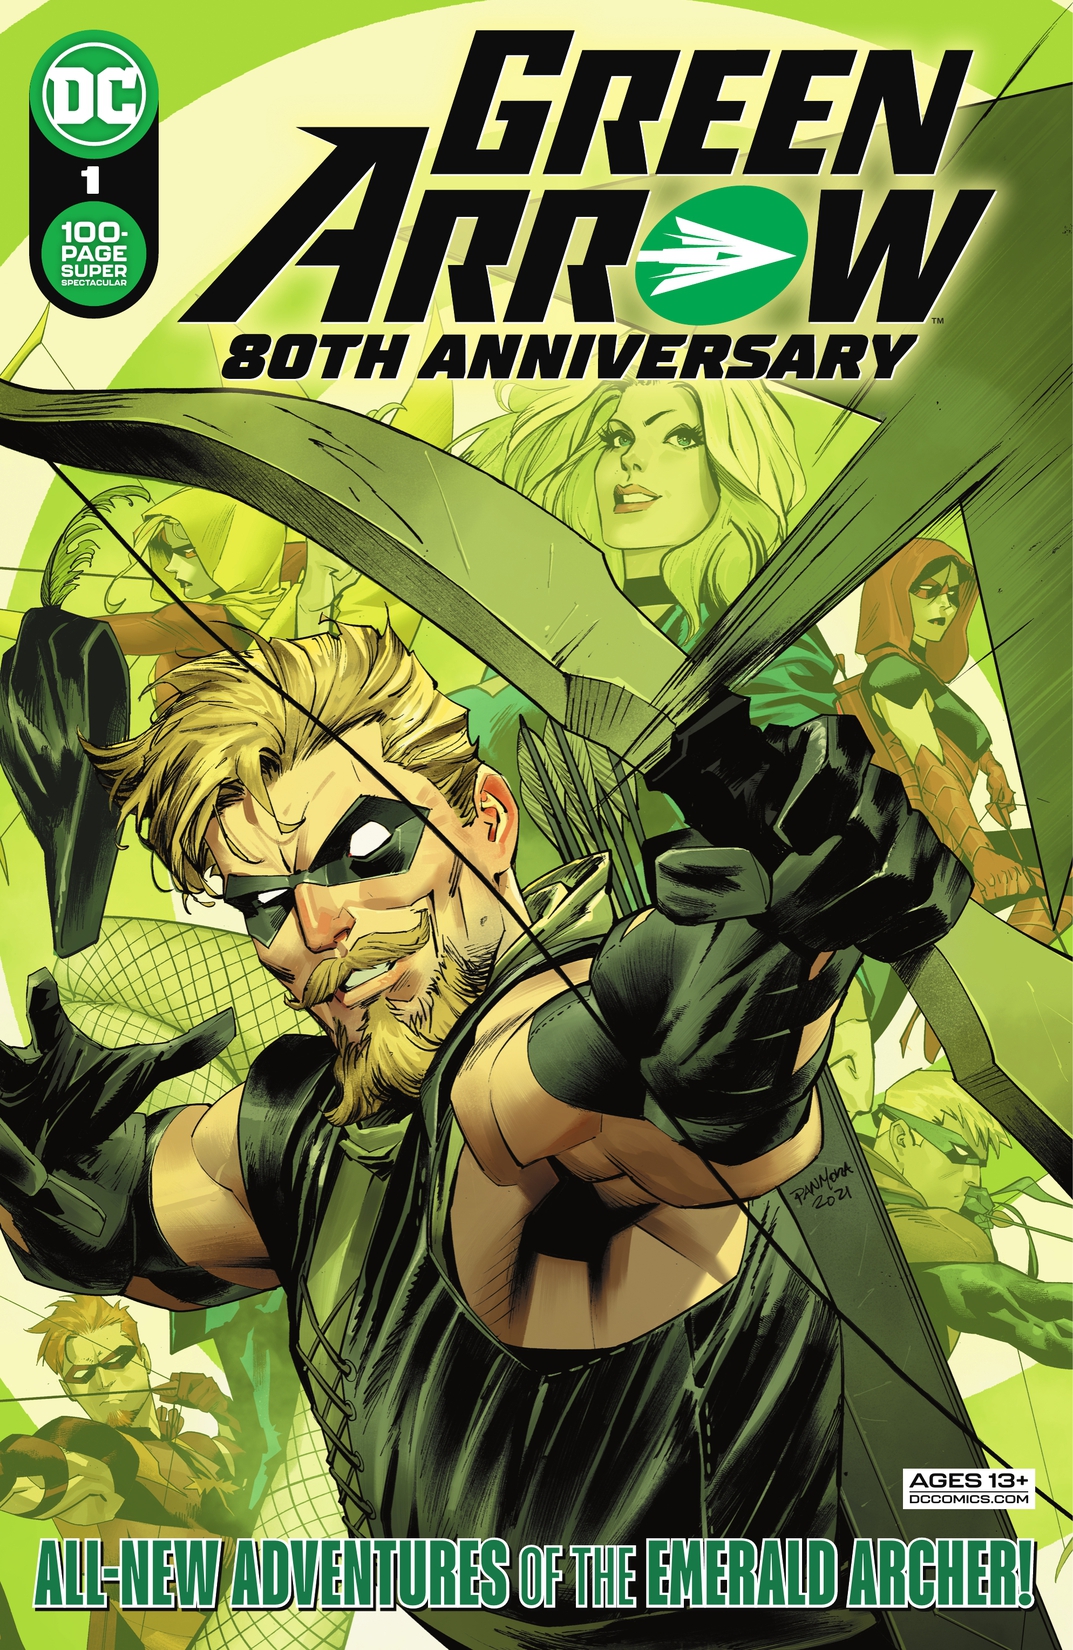 Green Arrow 80th Anniversary 100-Page Super Spectacular (2021) #1 preview images